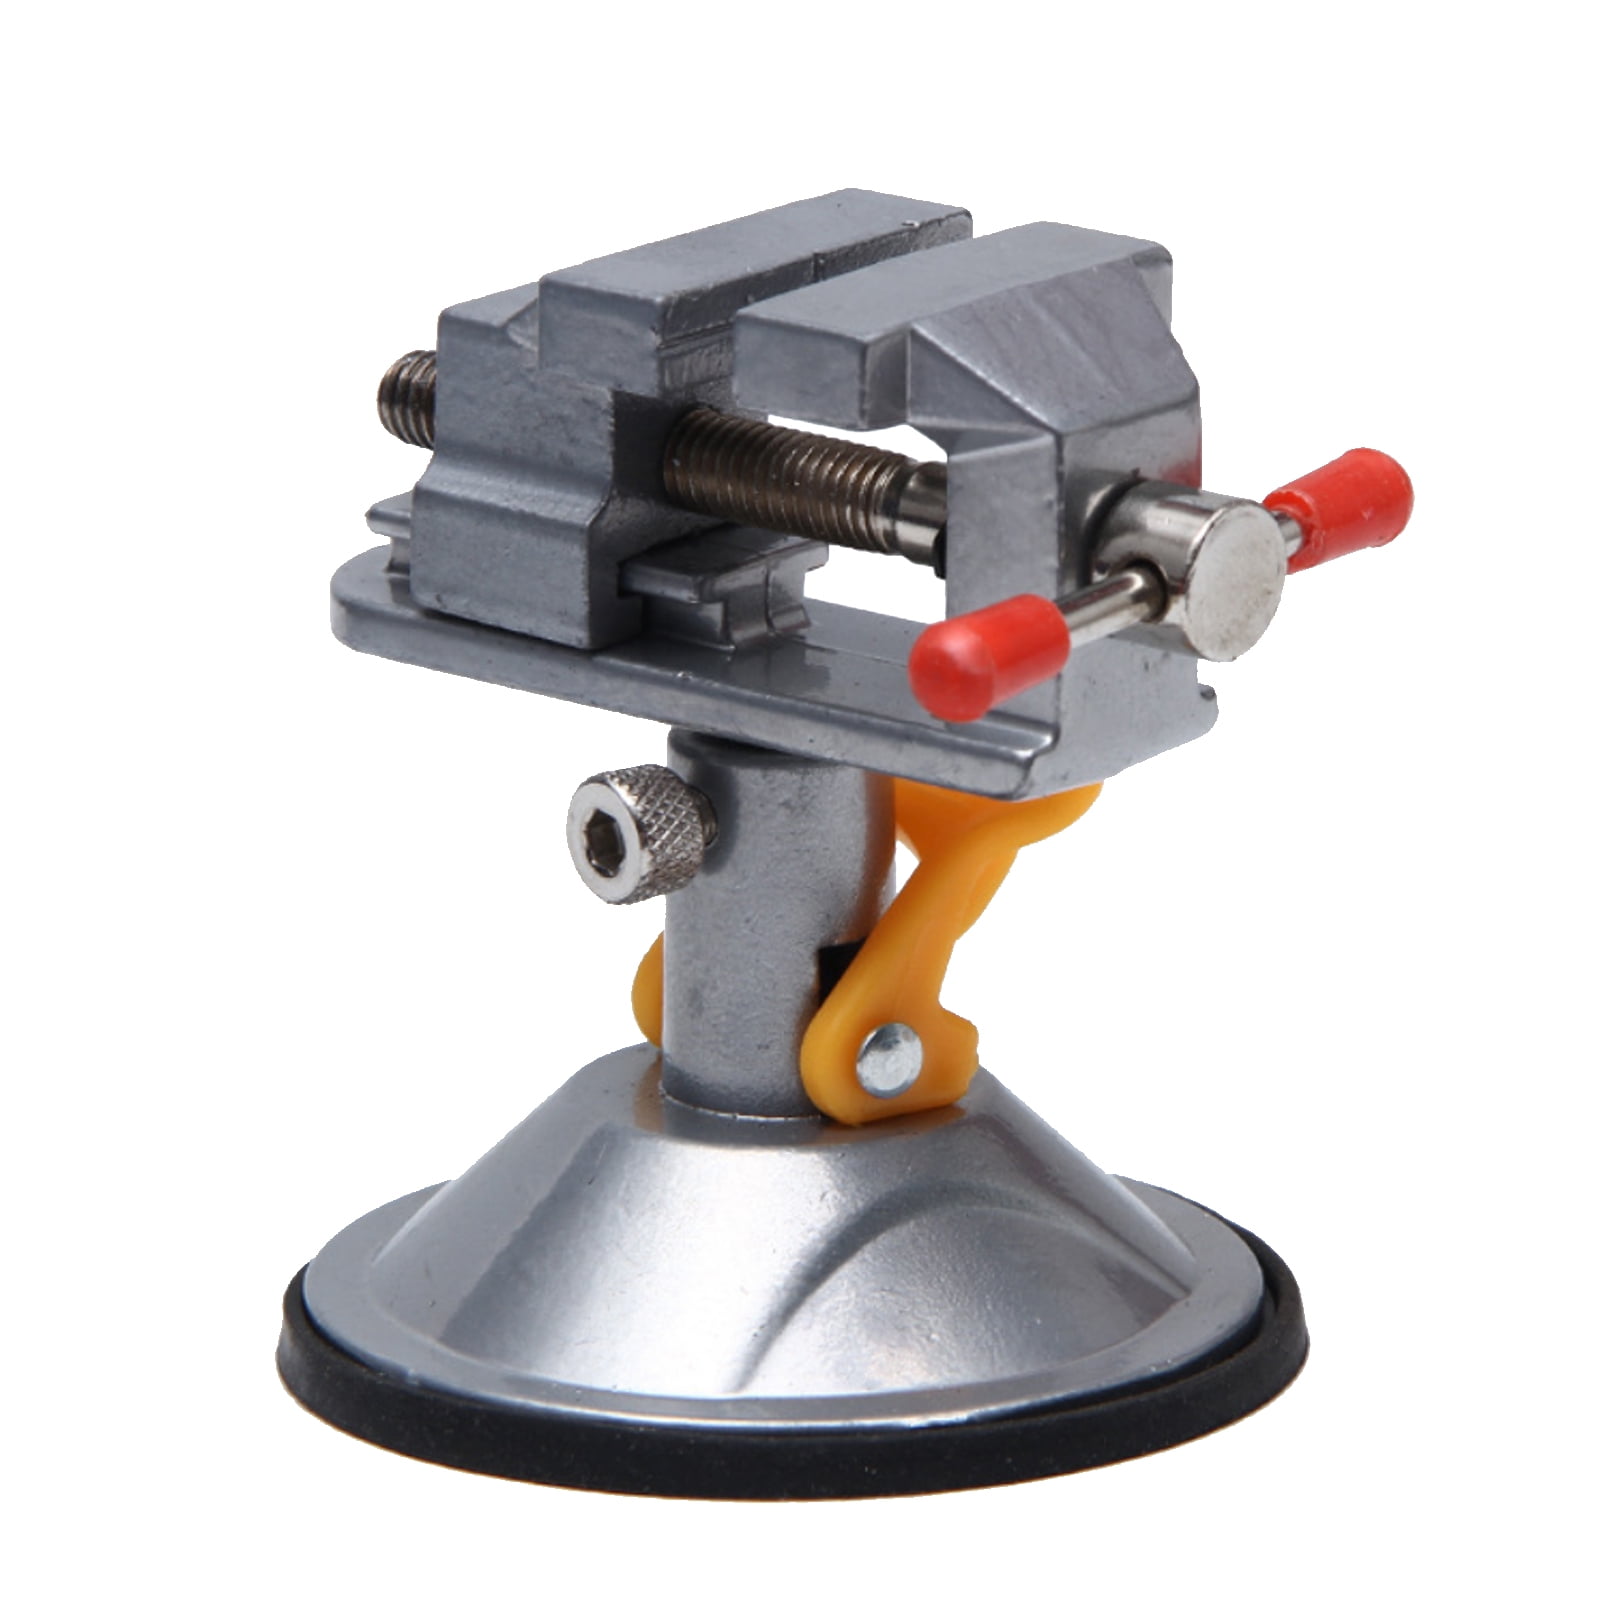 3.15 inches Vacuum Base Vise,Can be rotated 360-Degree High Qulitity